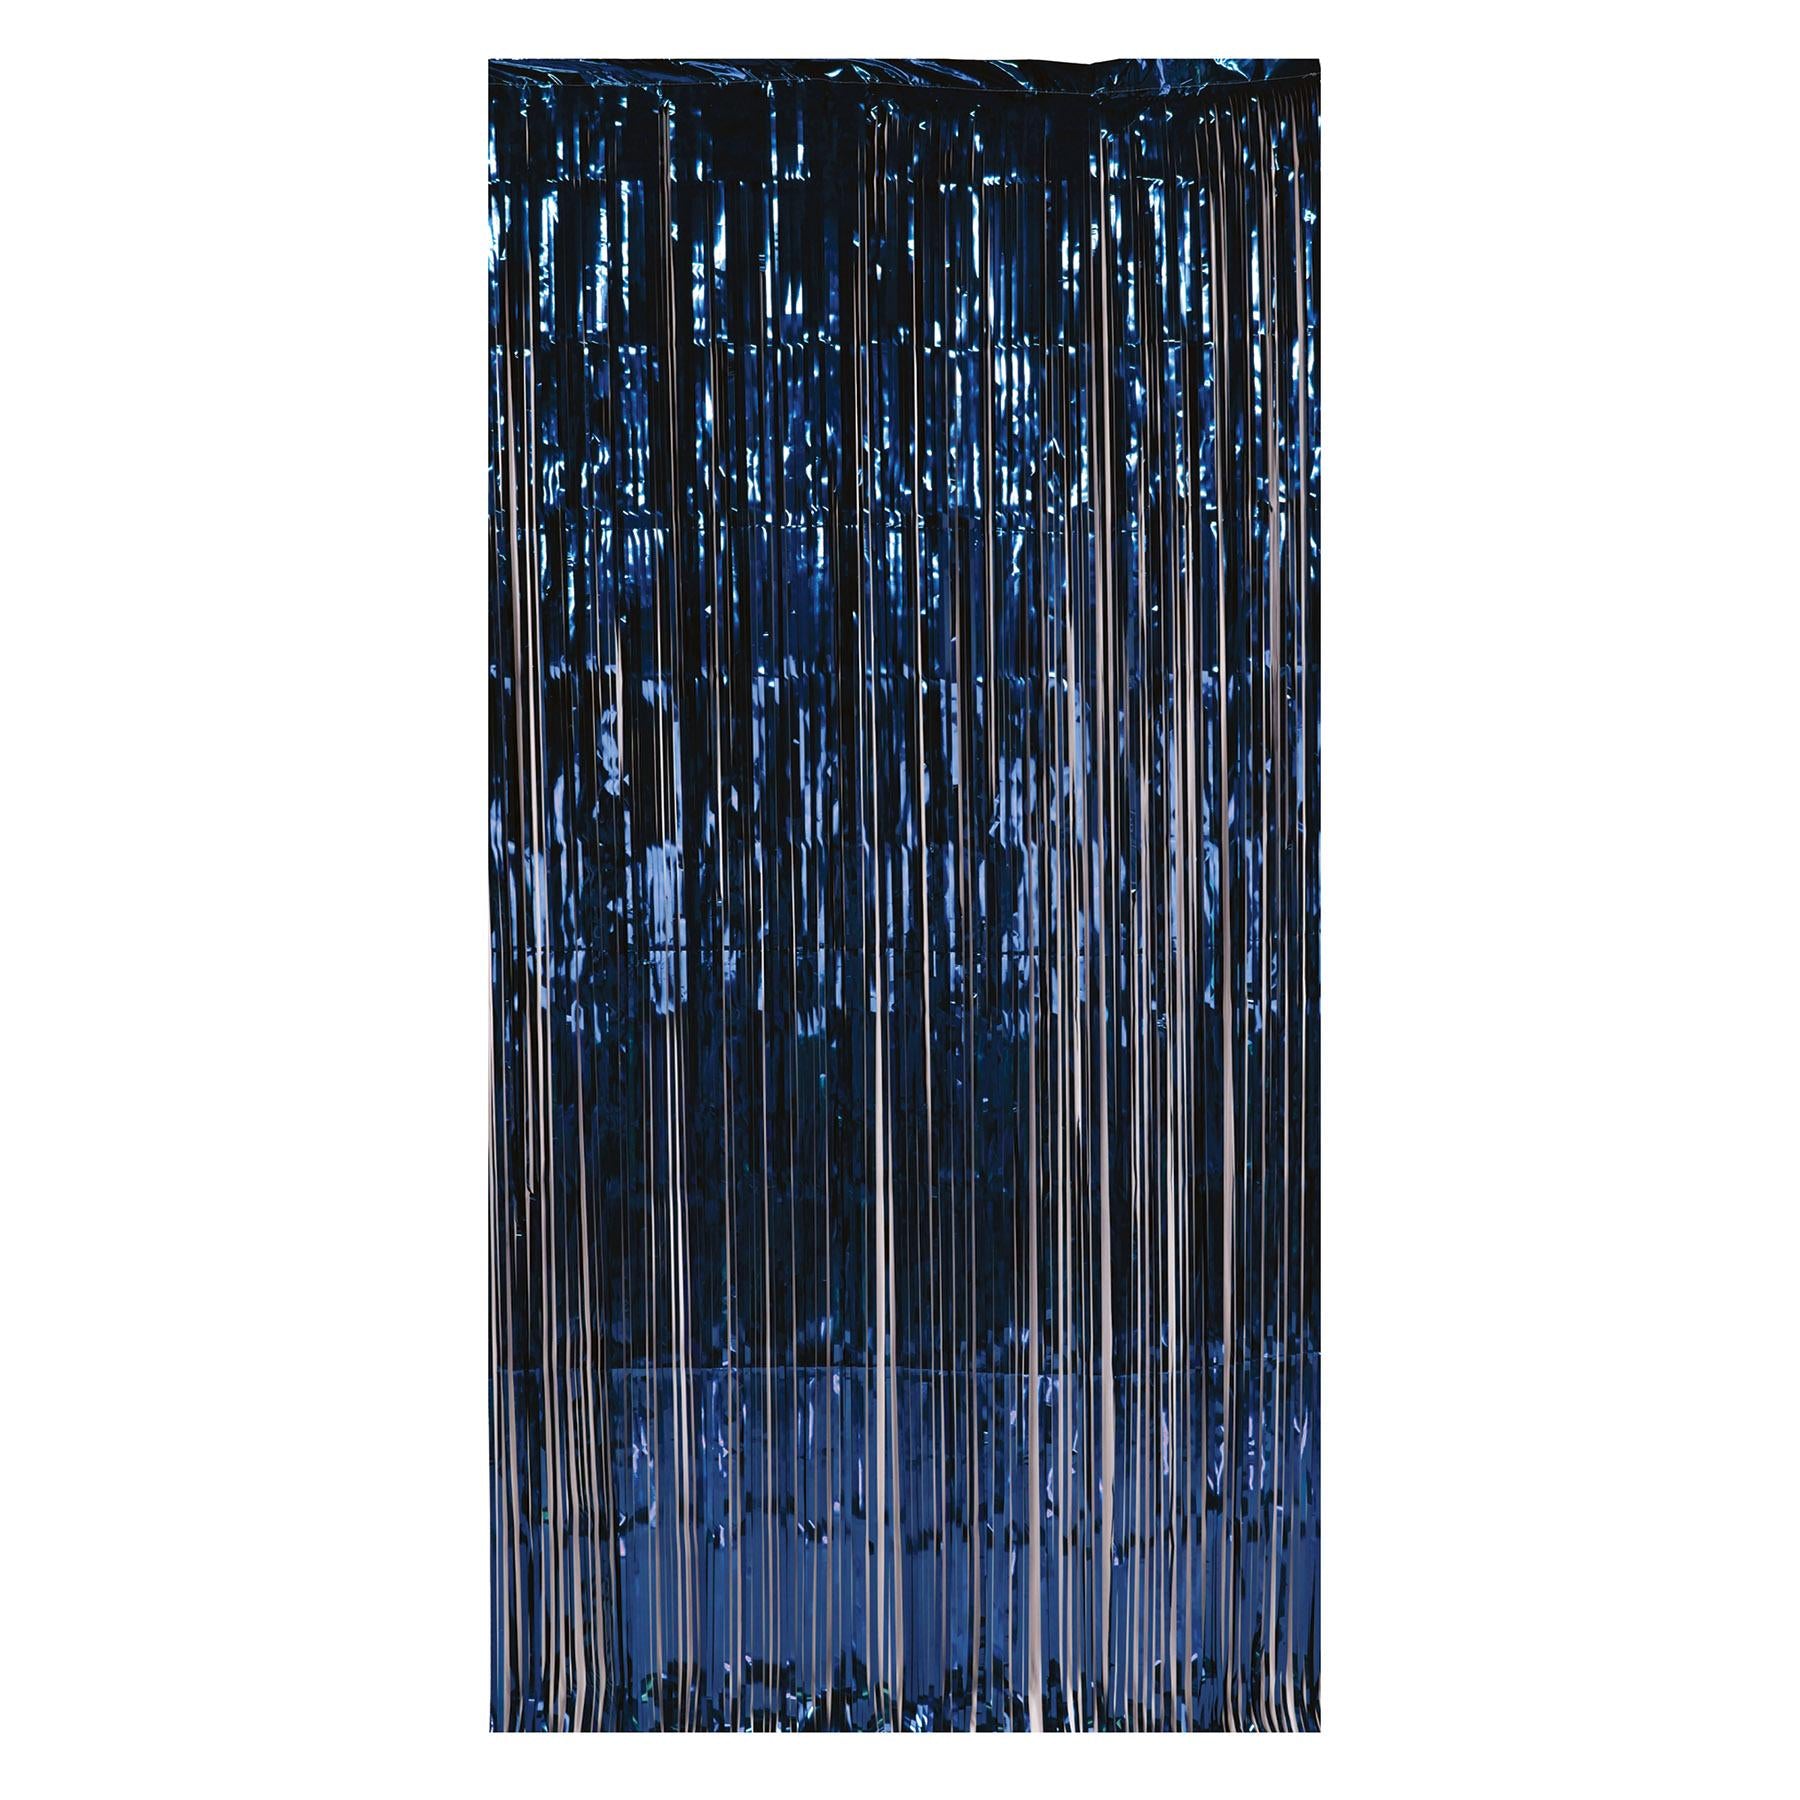 Beistle 1-Ply Gleam 'N Party Curtain - navy